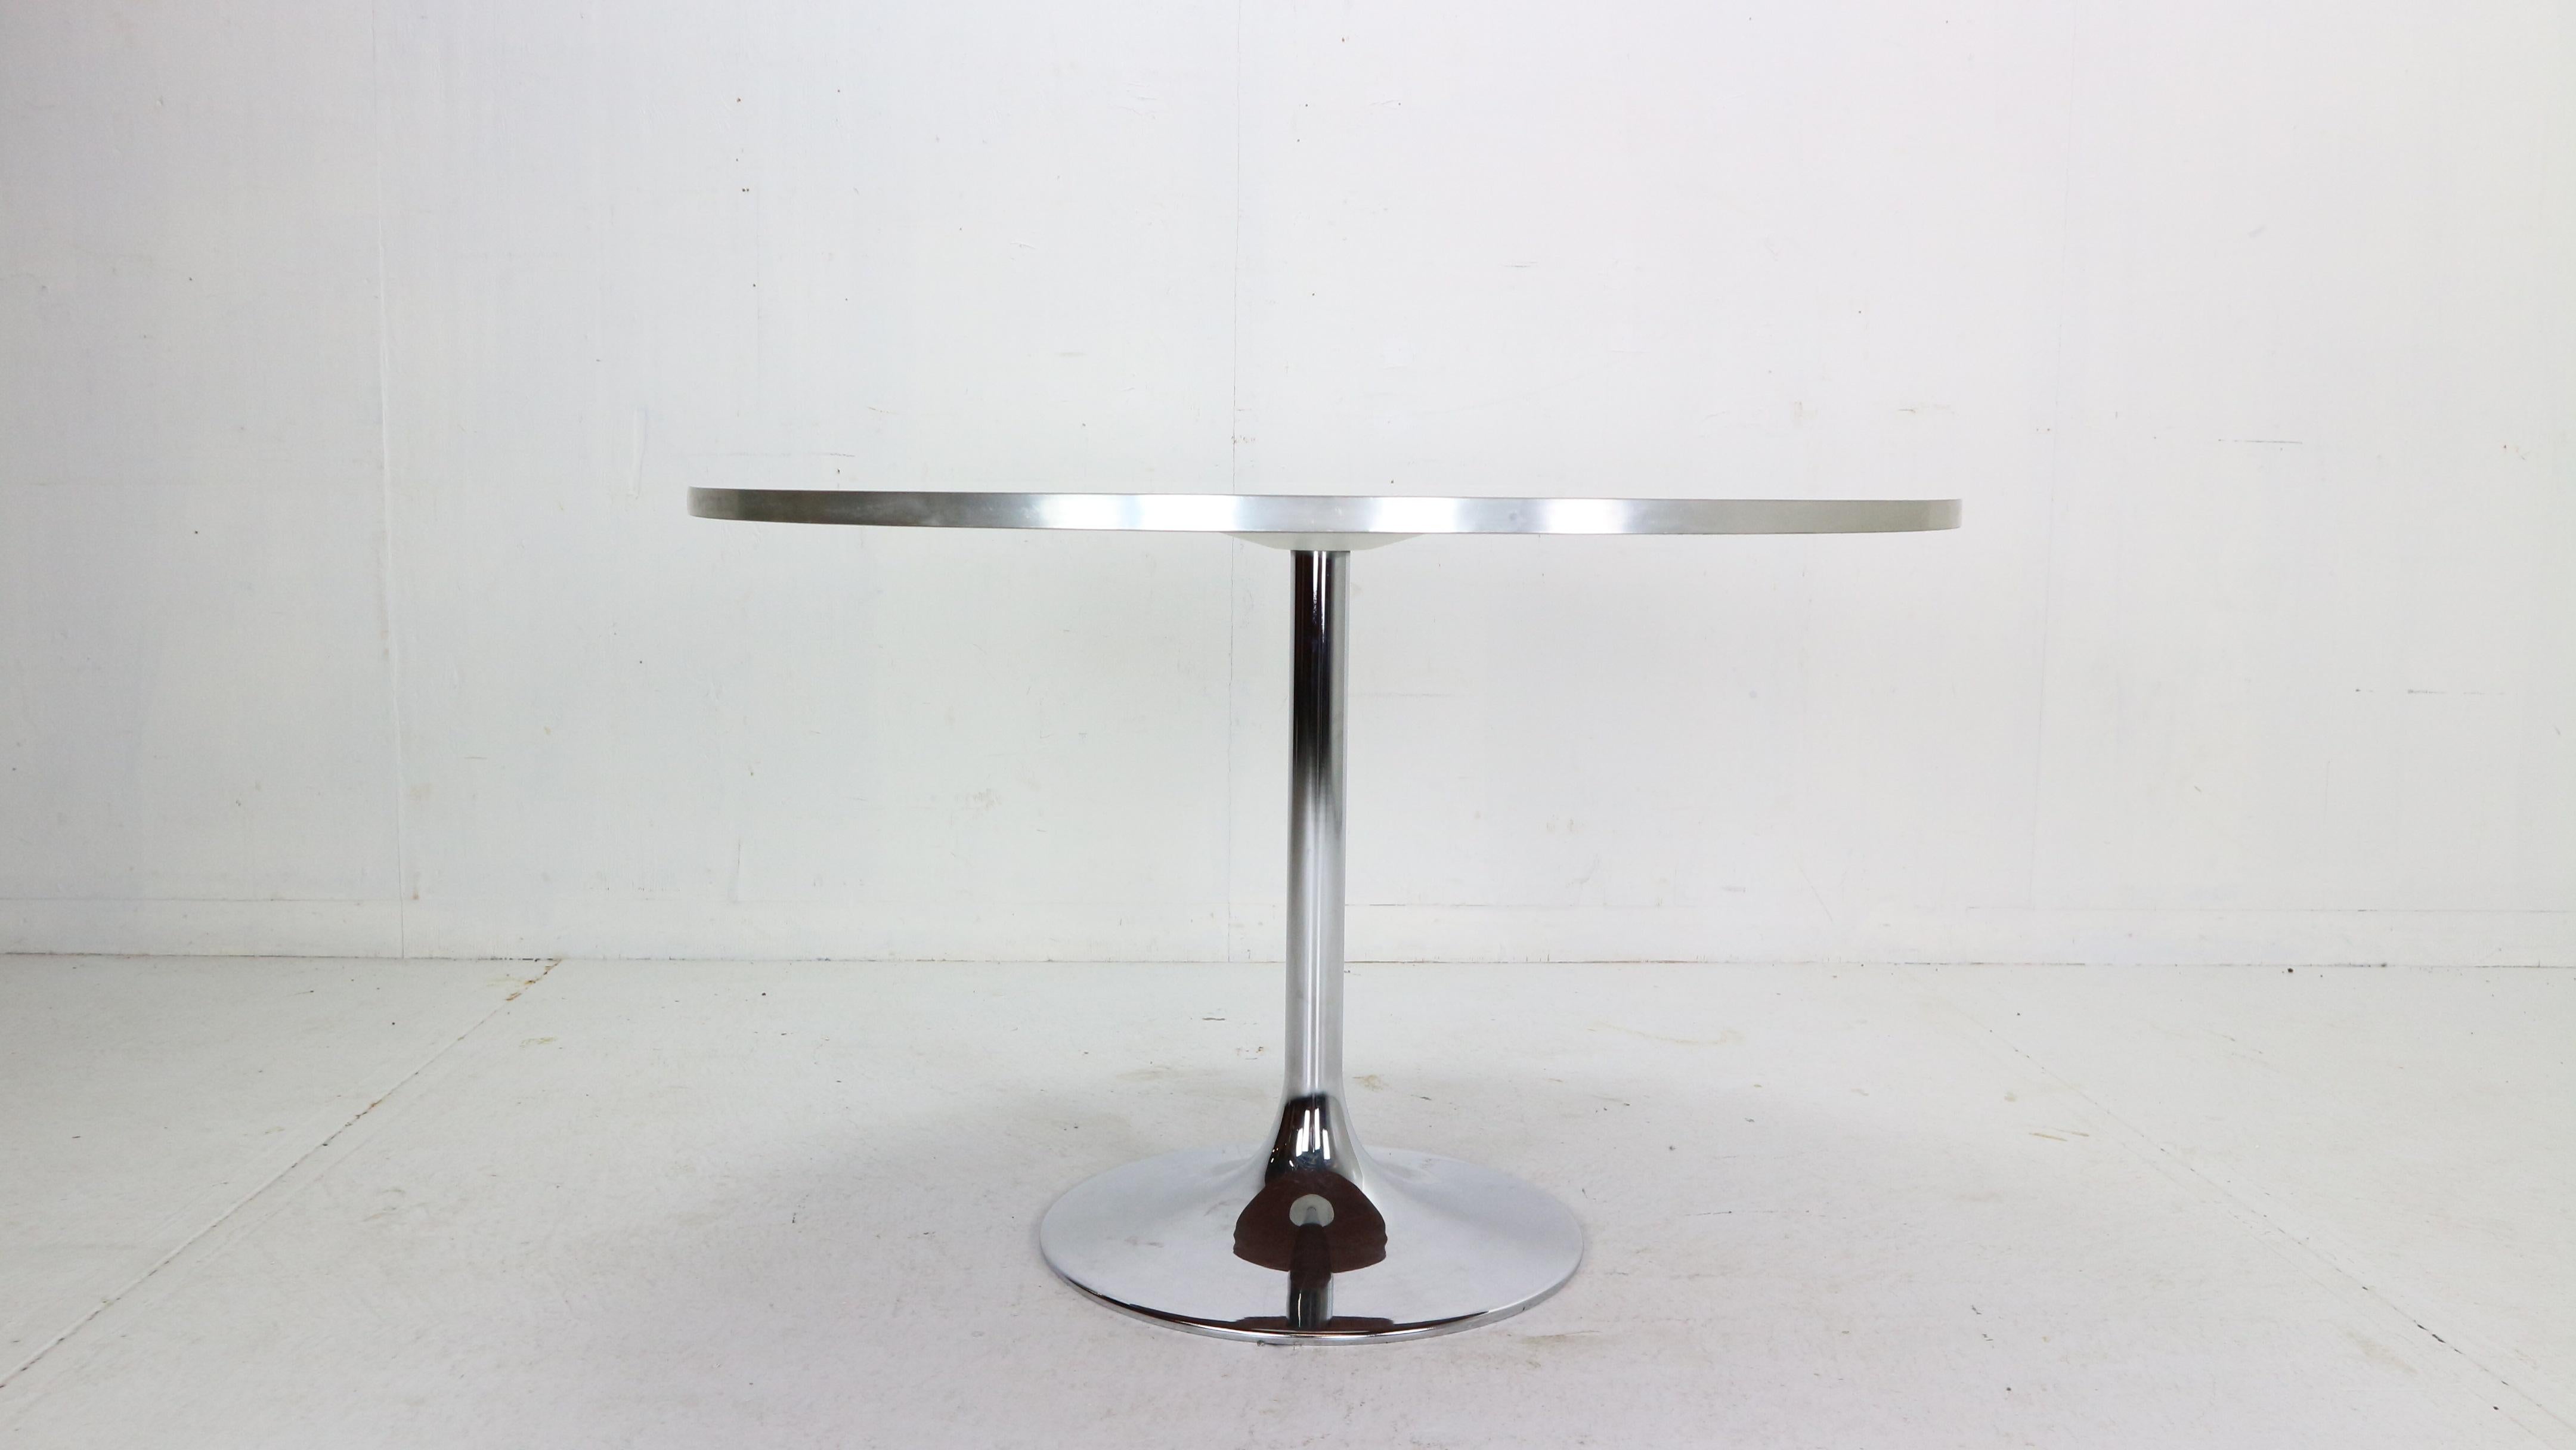 Mid- Century Modern period Tulip dinning table designed by Börje Johanson for his own company Johanson Design Markaryd, 1968 Sweden.

White laminate bistro or dining table with chrome pedestal base and white laminate top. 
Very good condition,